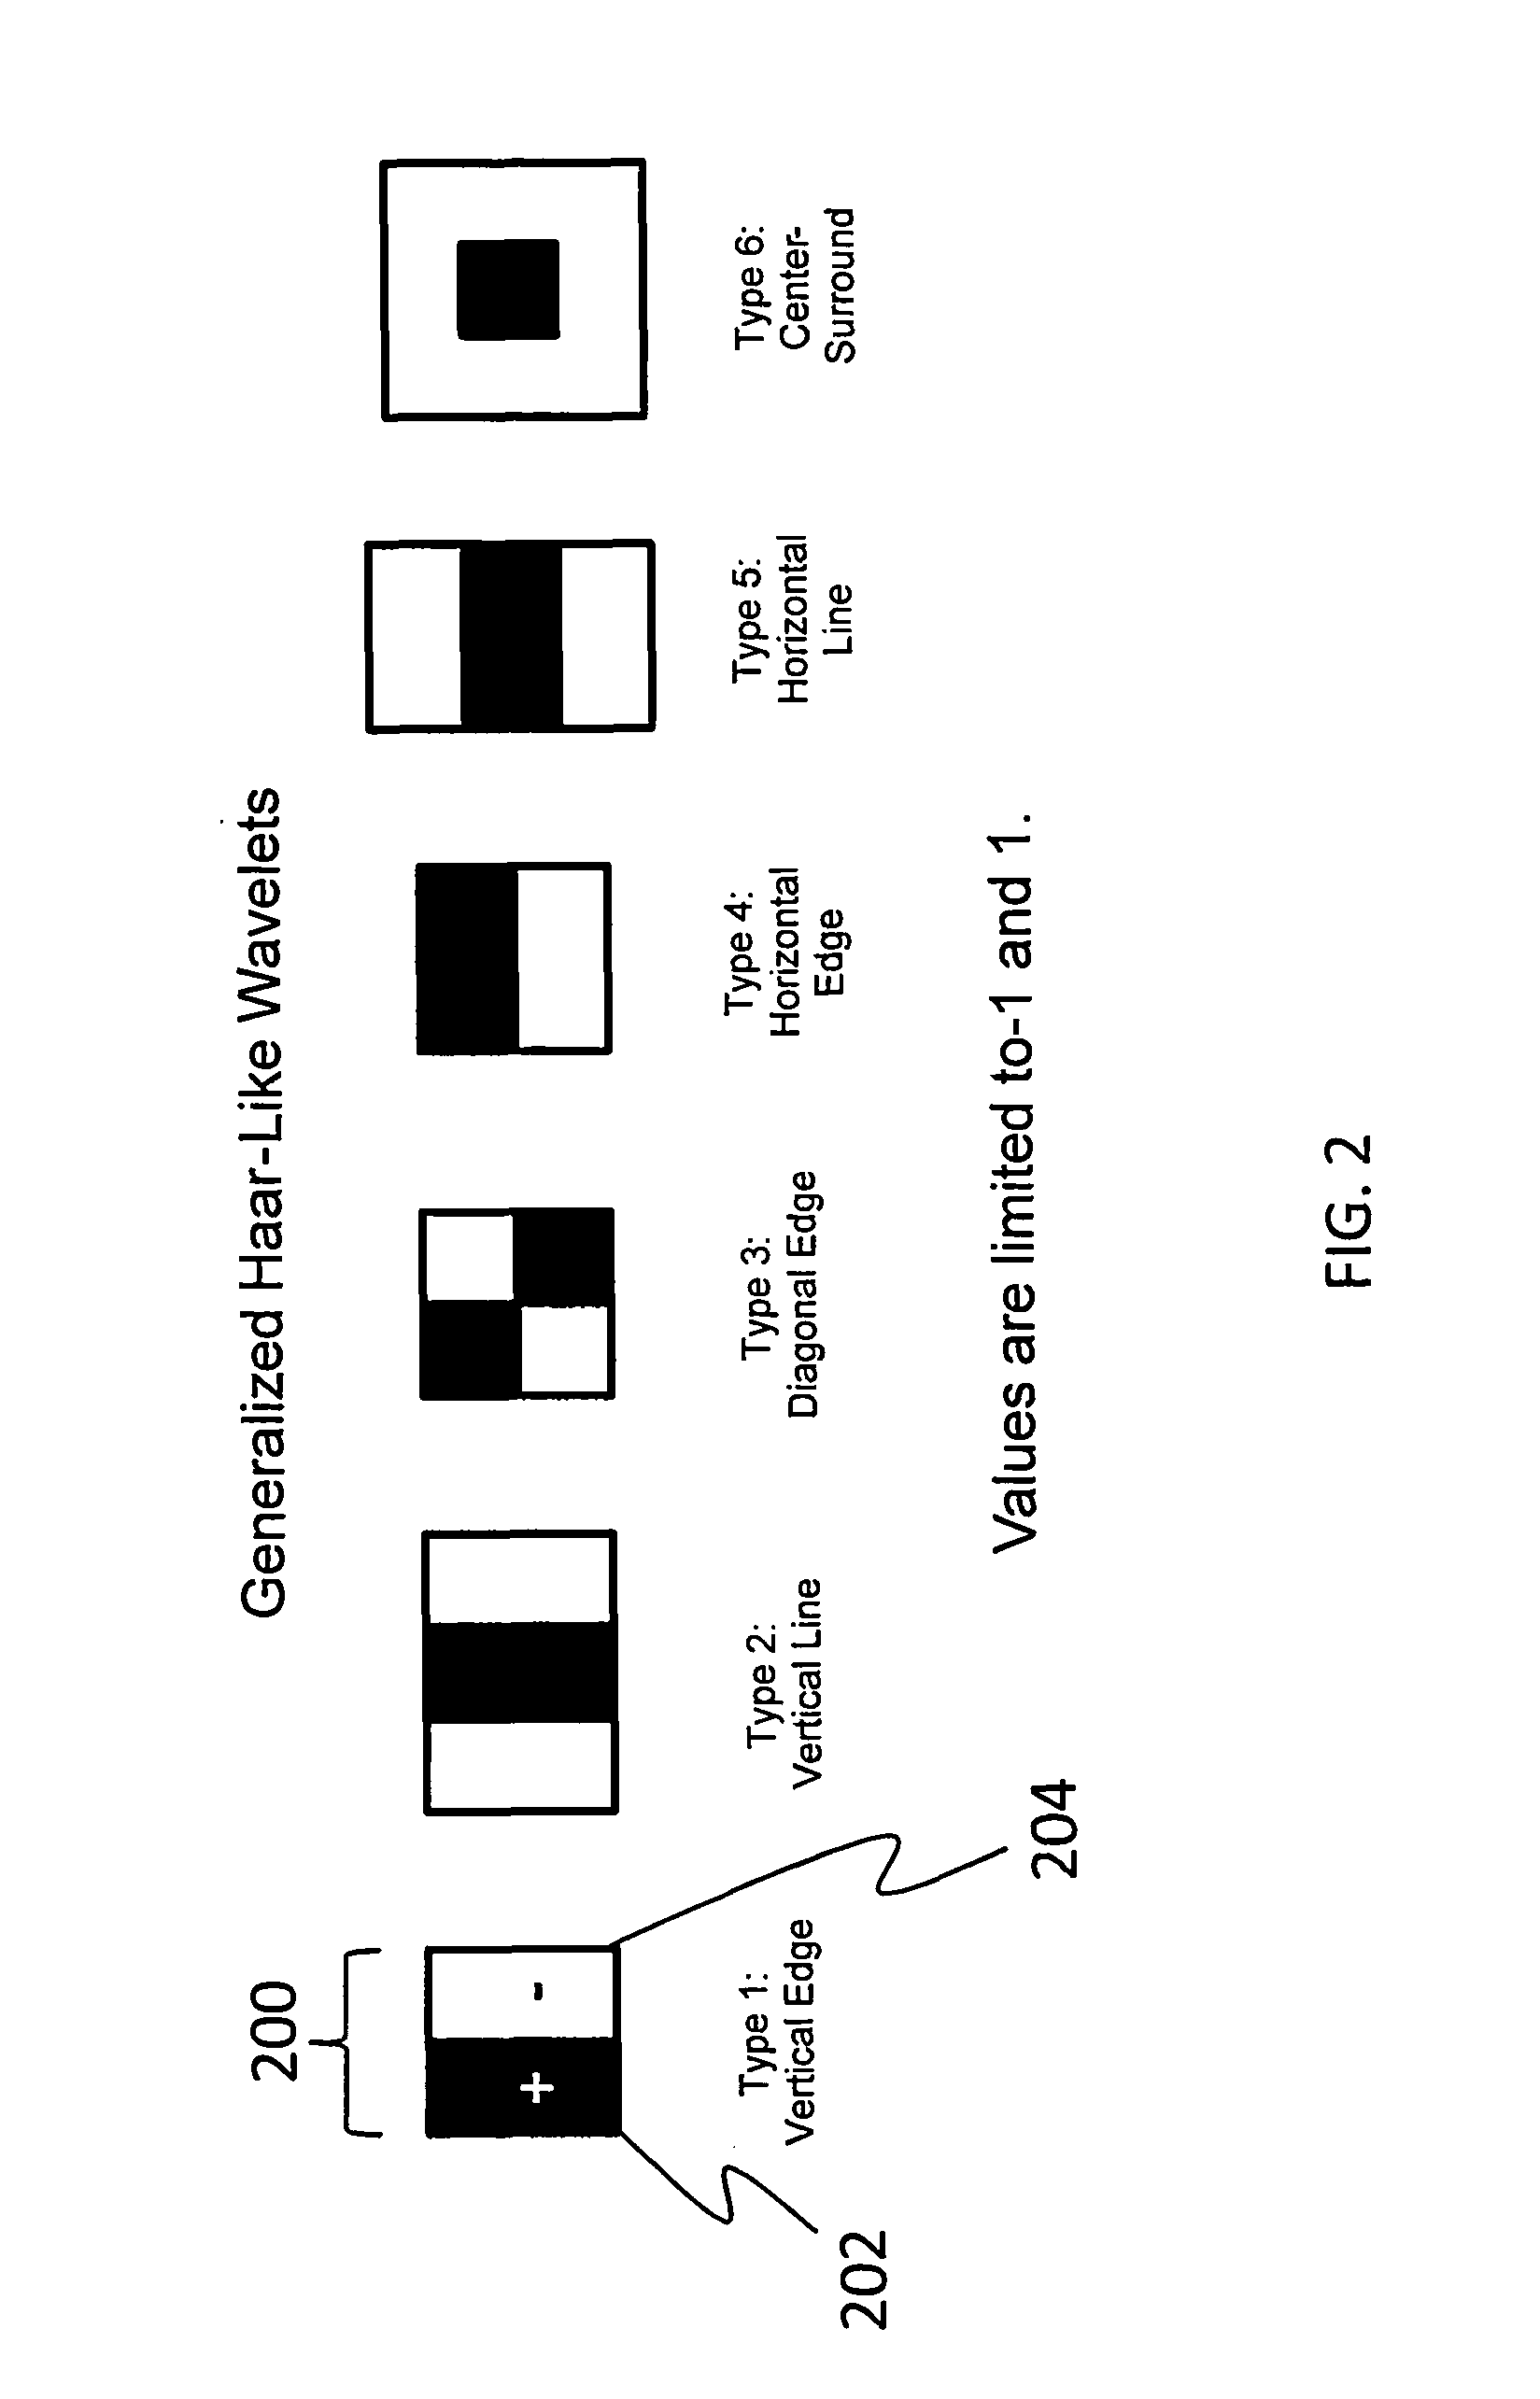 Multi-stage method for object detection using cognitive swarms and system for automated response to detected objects